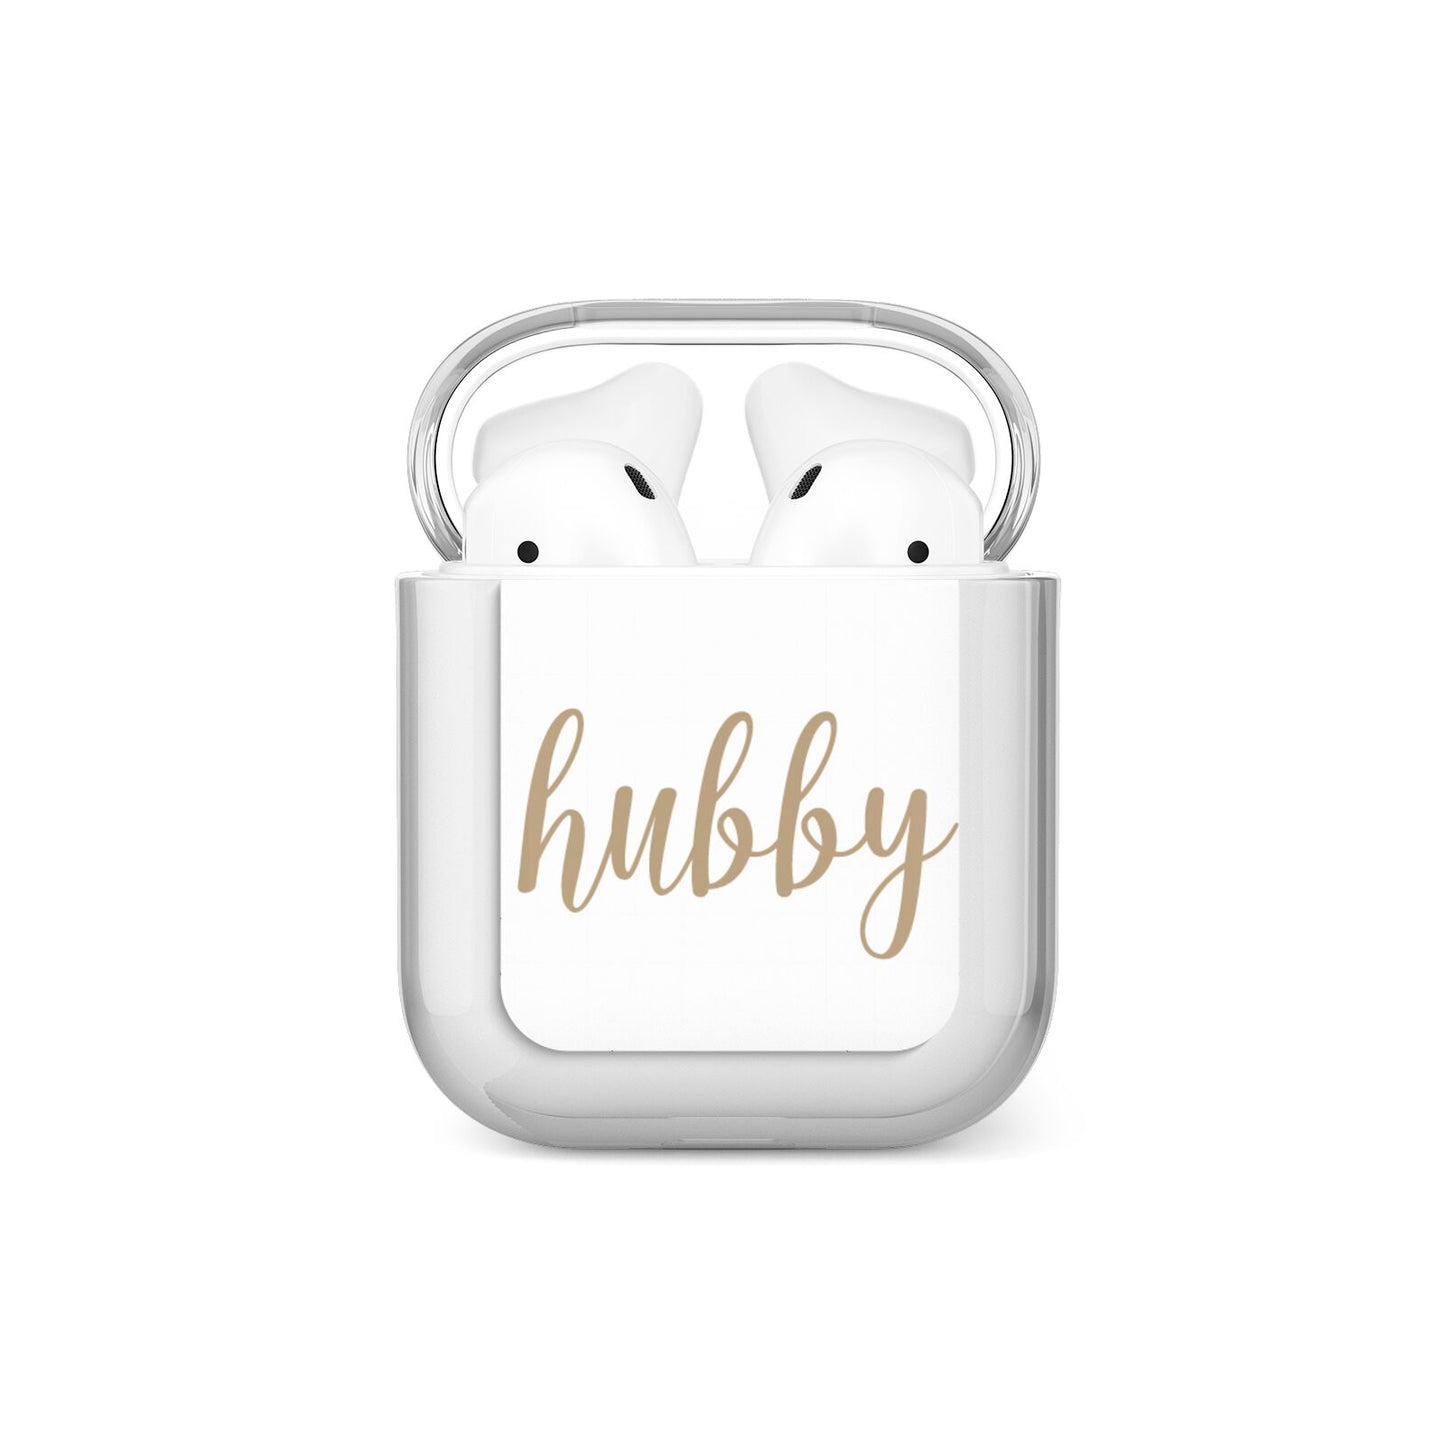 Hubby AirPods Case